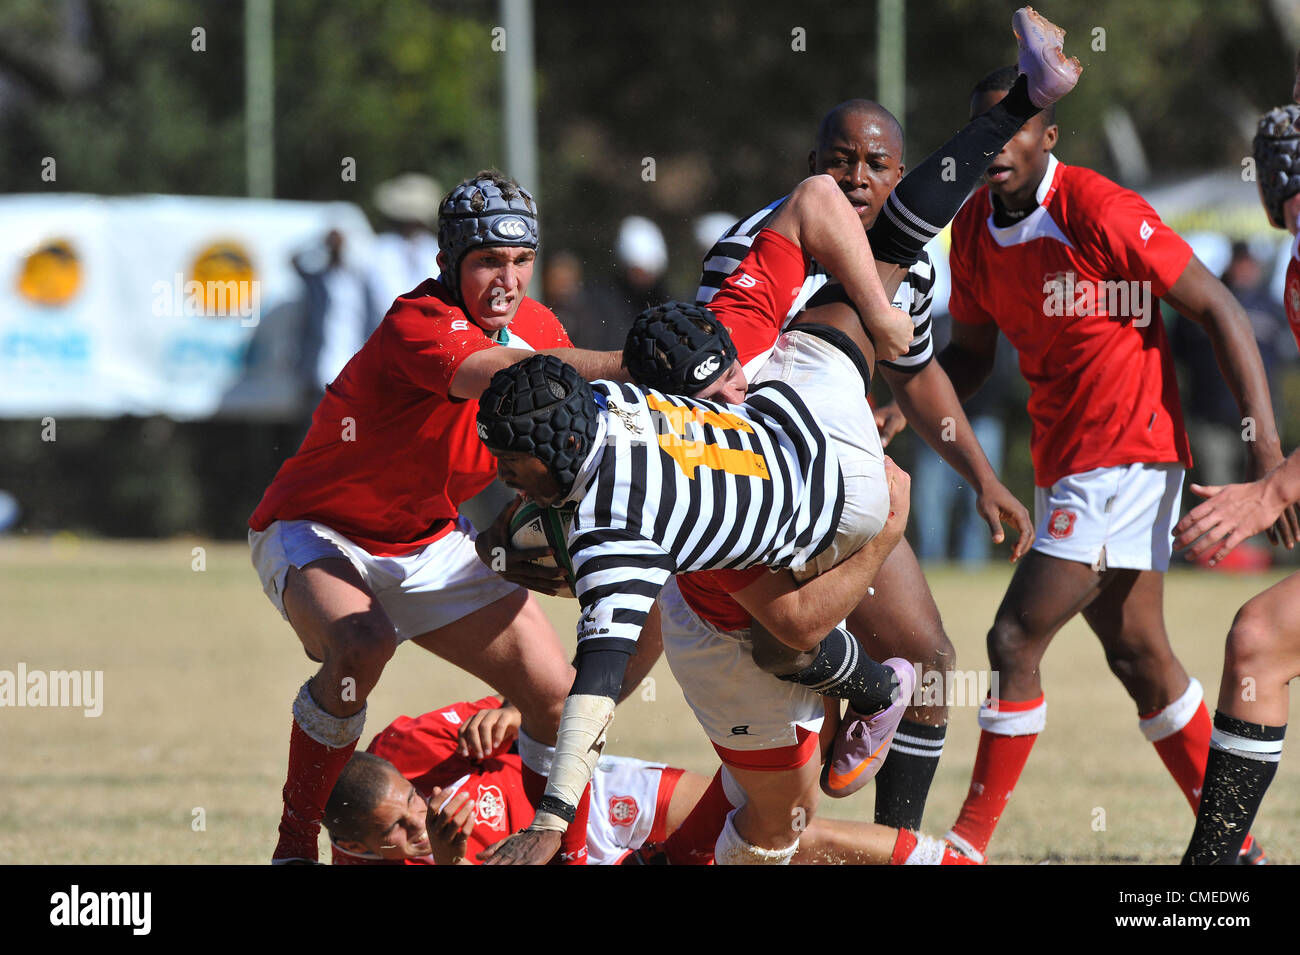 JOHANNESBURG, SOUTH AFRICA - JULY 28, Sibusiso Kunene of Jeppe tackled during the FNB Classic Clashes match between Jeppe (Black/White) and KES (Red/White)from Jeppe Boys High on July 28, 2012 in Johannesburg, South Africa Photo by Duif du Toit / Gallo Images Stock Photo